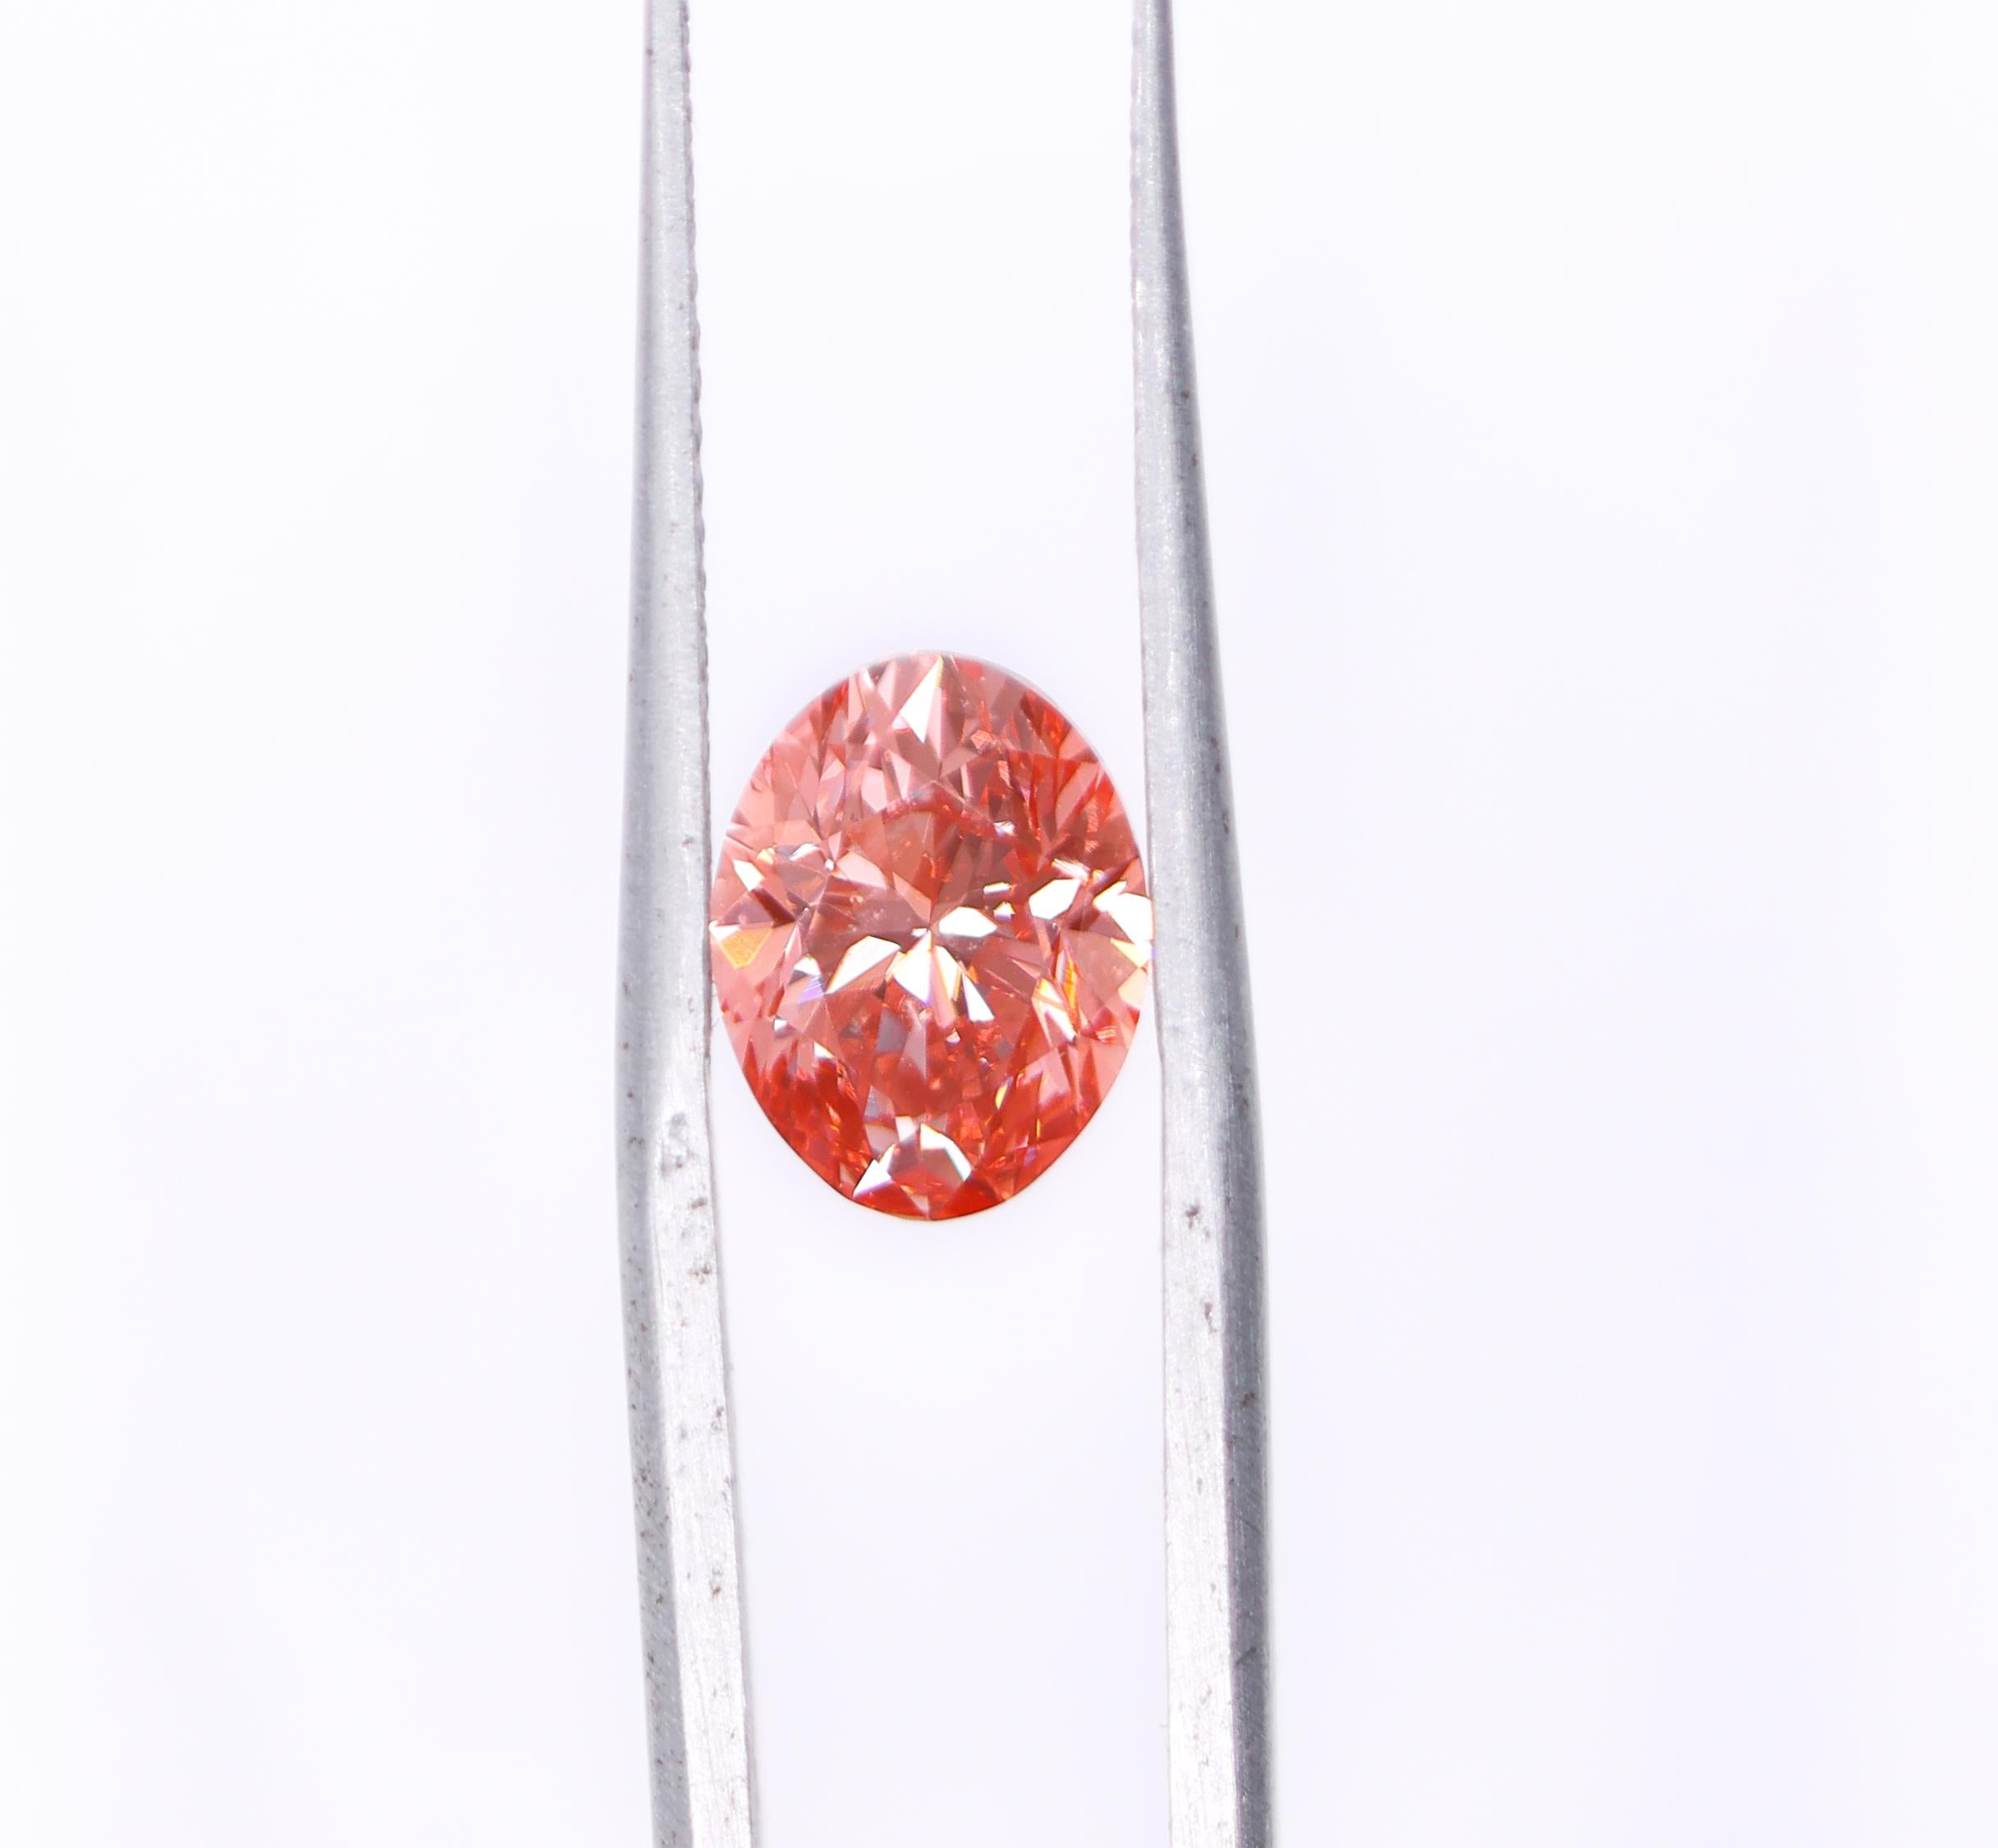 We are so excited to bring you this gorgeous GIA certified 2 carat natural earth mined orangy pink diamond! This piece is HPHT treated giving it an absolutely gorgeous fancy vivid color with an orange flouresence. In a world drowning in overpriced